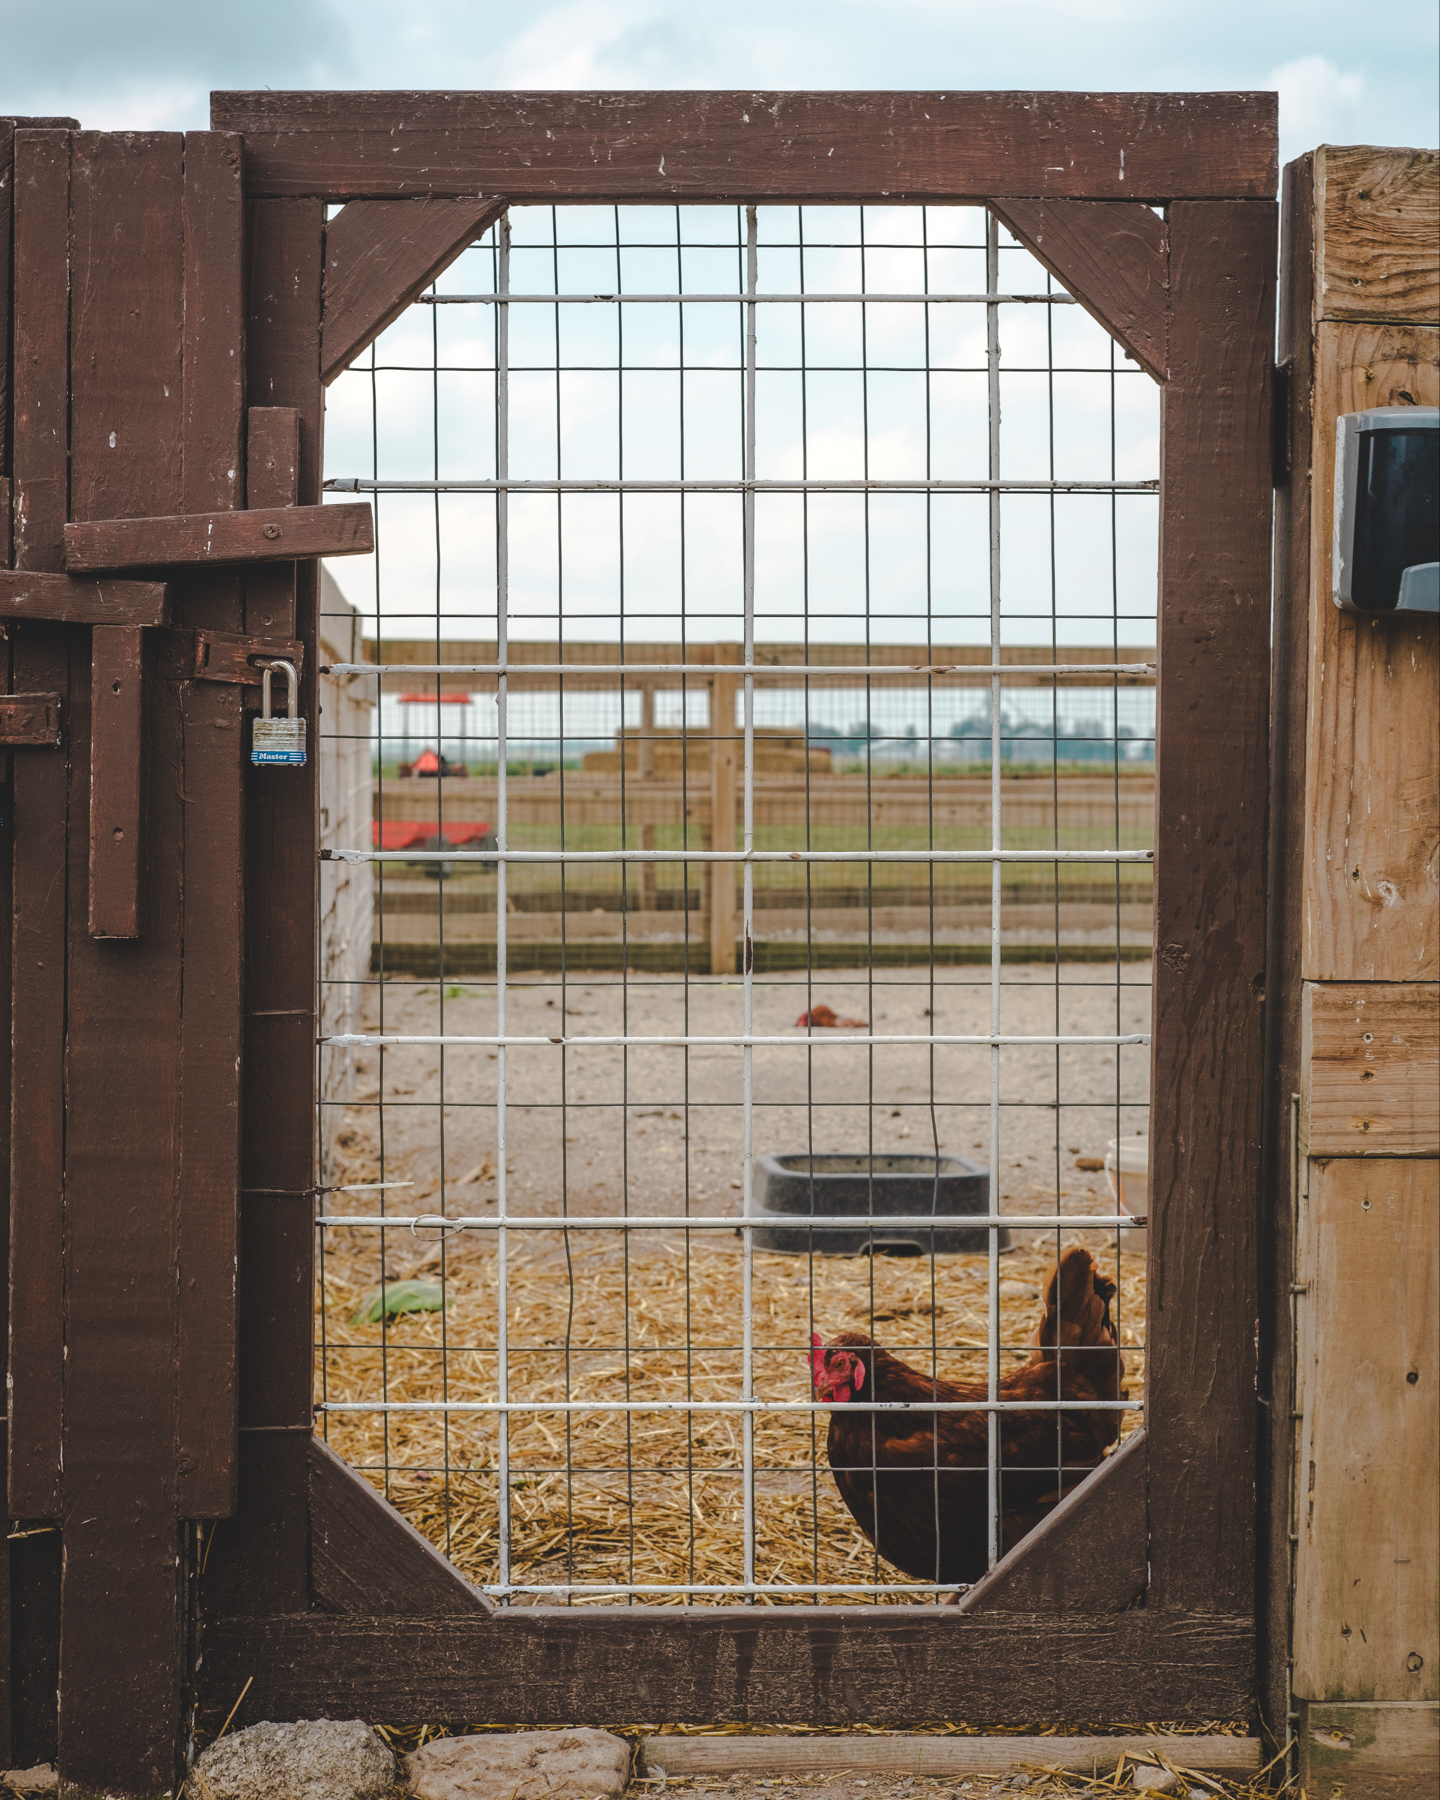 A wooden farm gate with a chicken visible through the gate. Straw covers the ground inside the enclosure.